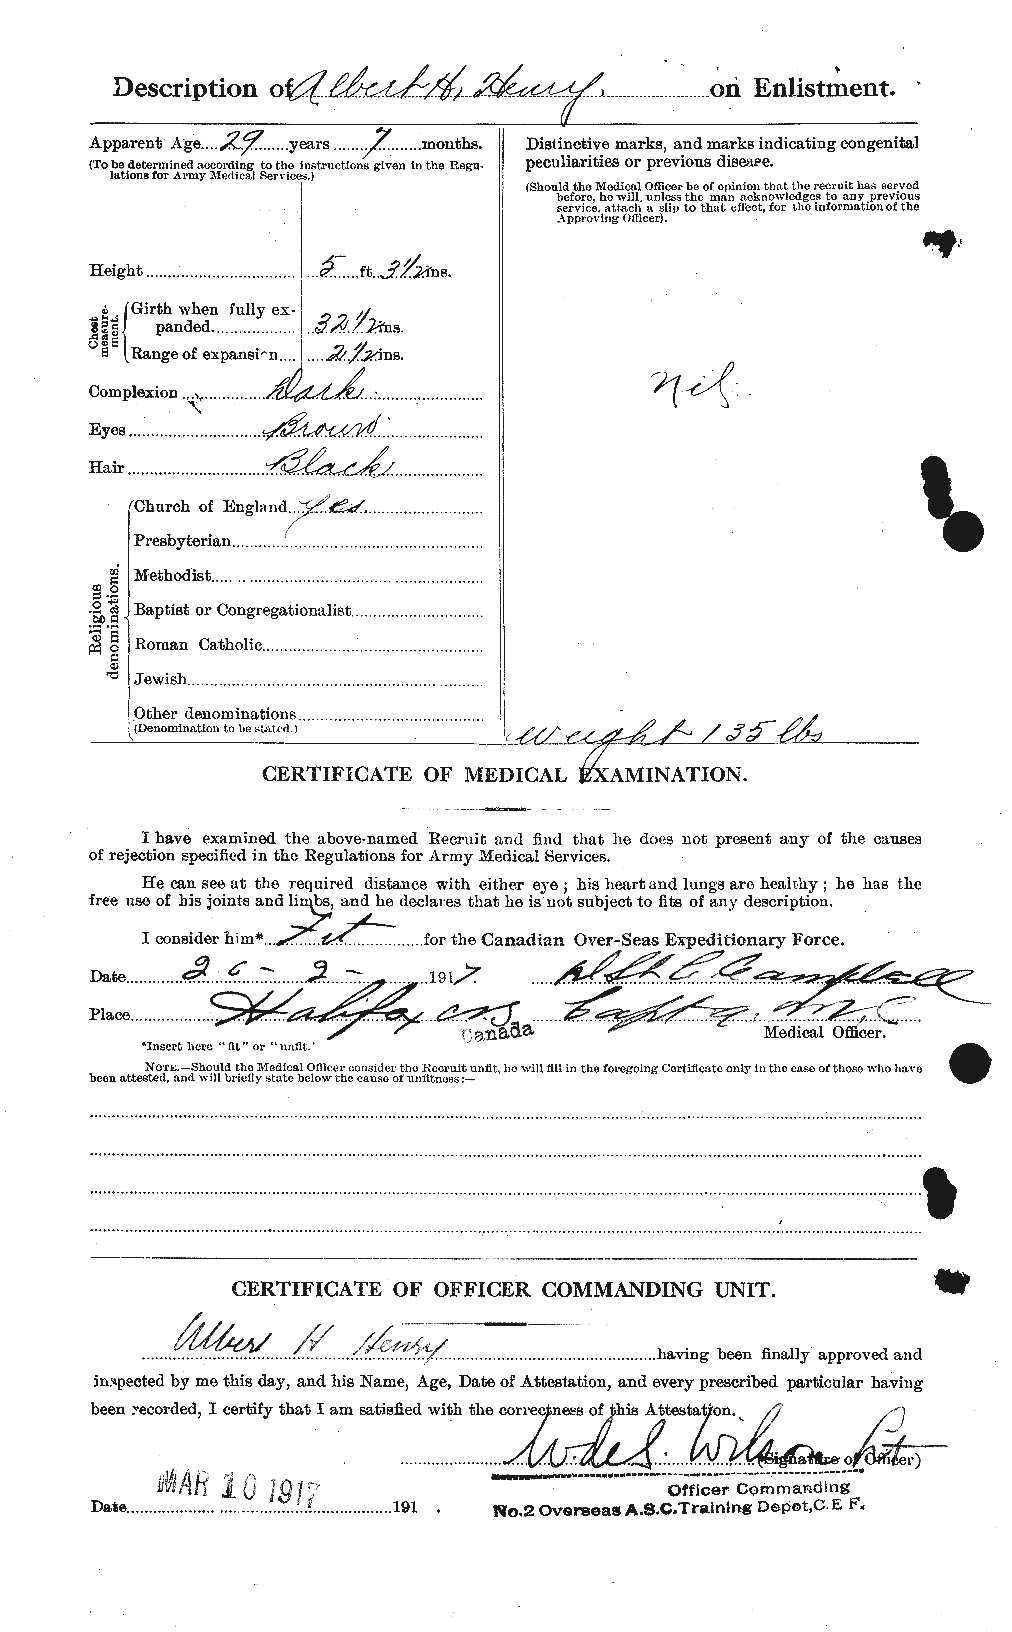 Personnel Records of the First World War - CEF 391651b